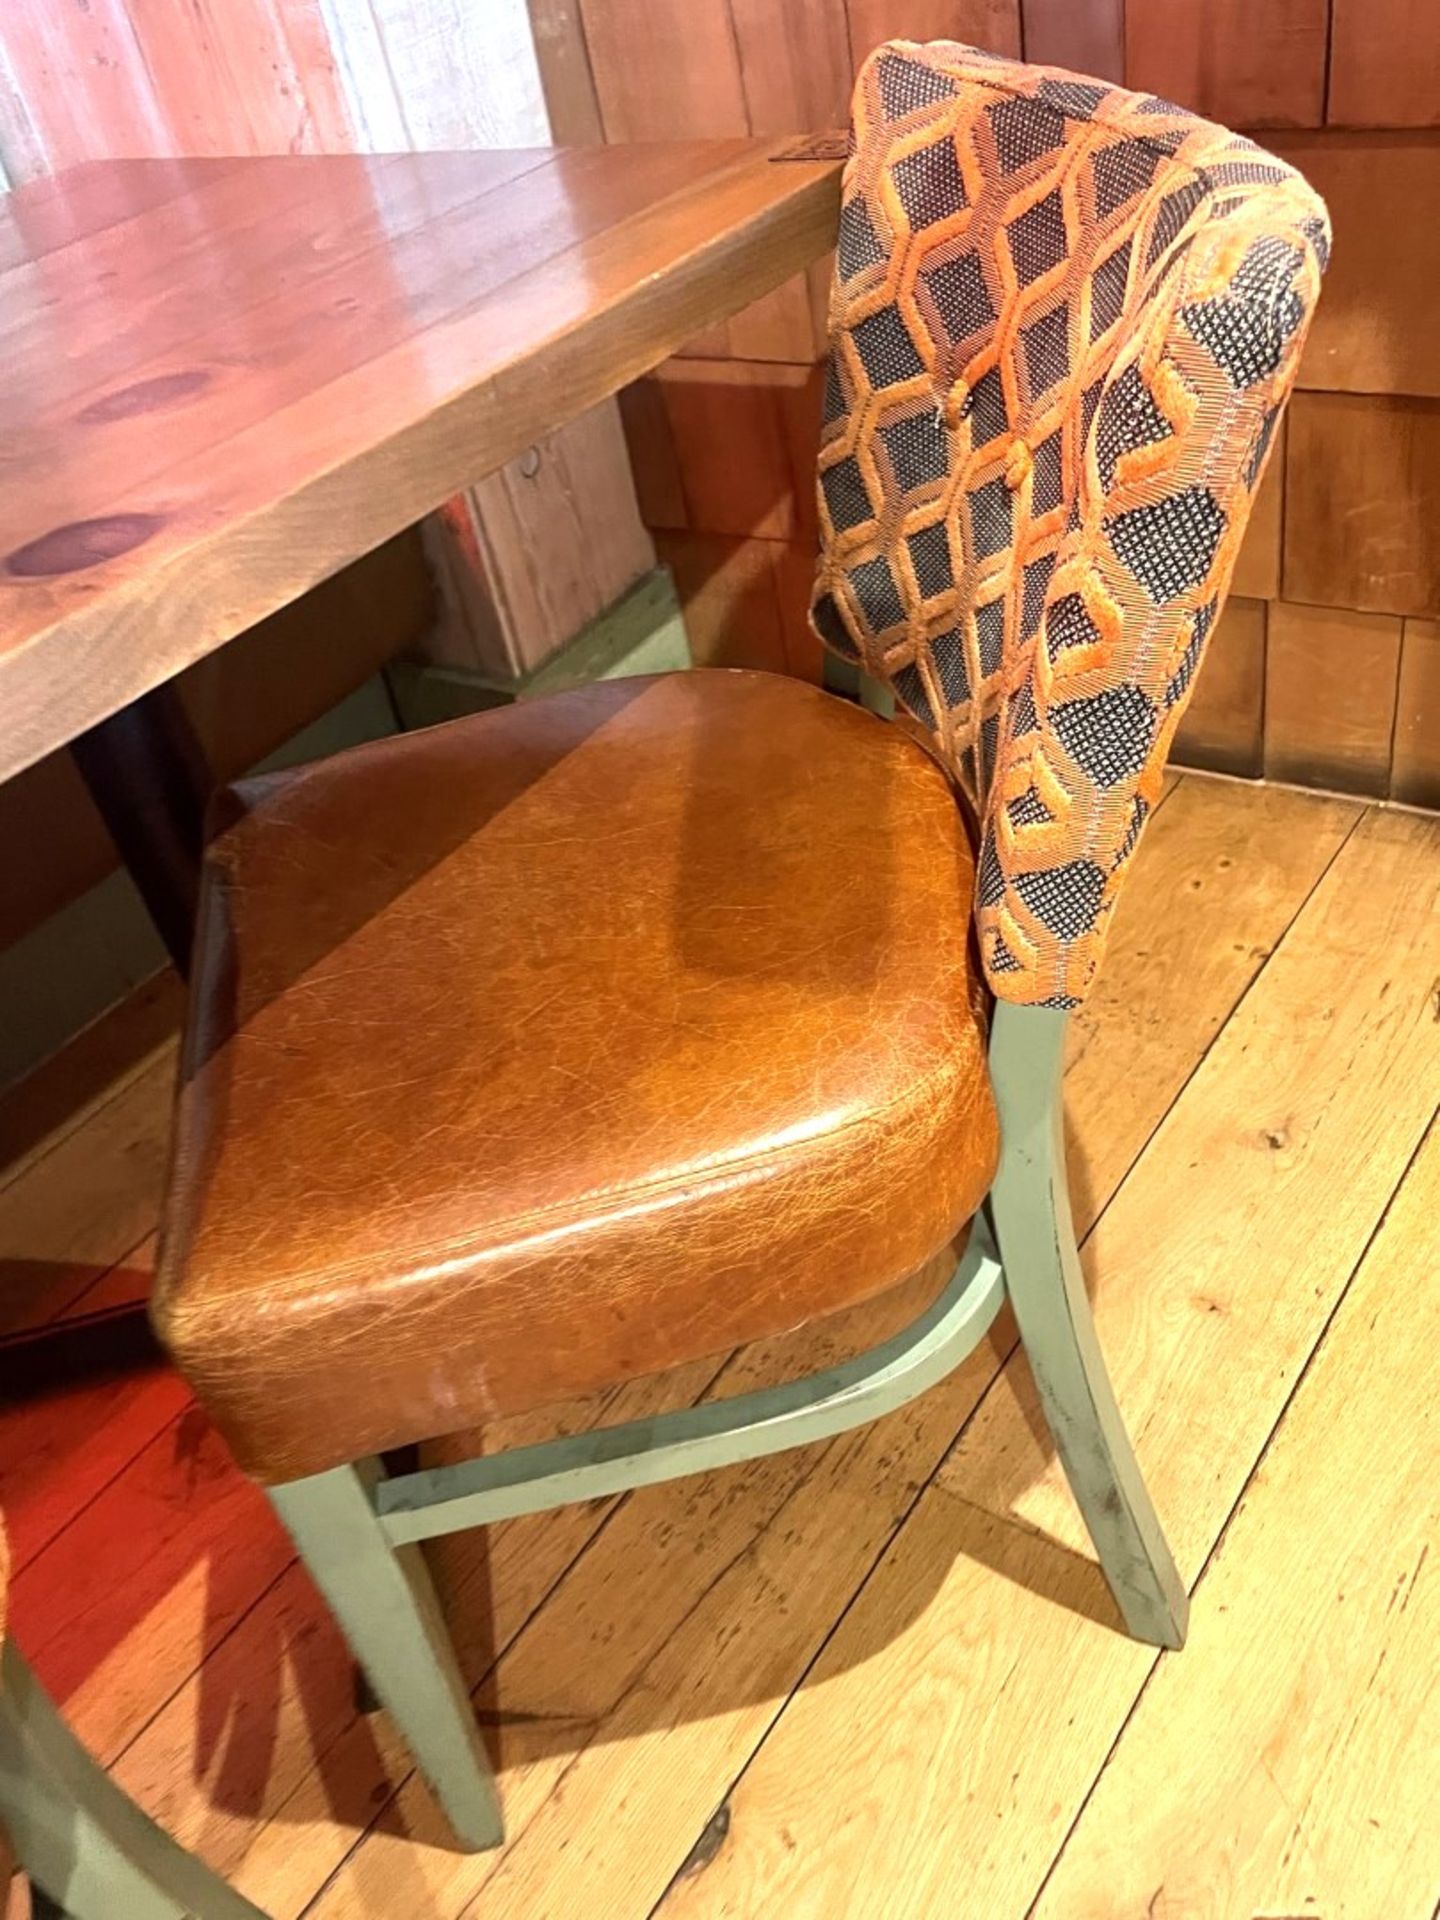 8 x Commercial Restaurant Dining Chairs Featuring Tan Leather Seats, Upholstered Back Rests and - Image 9 of 9